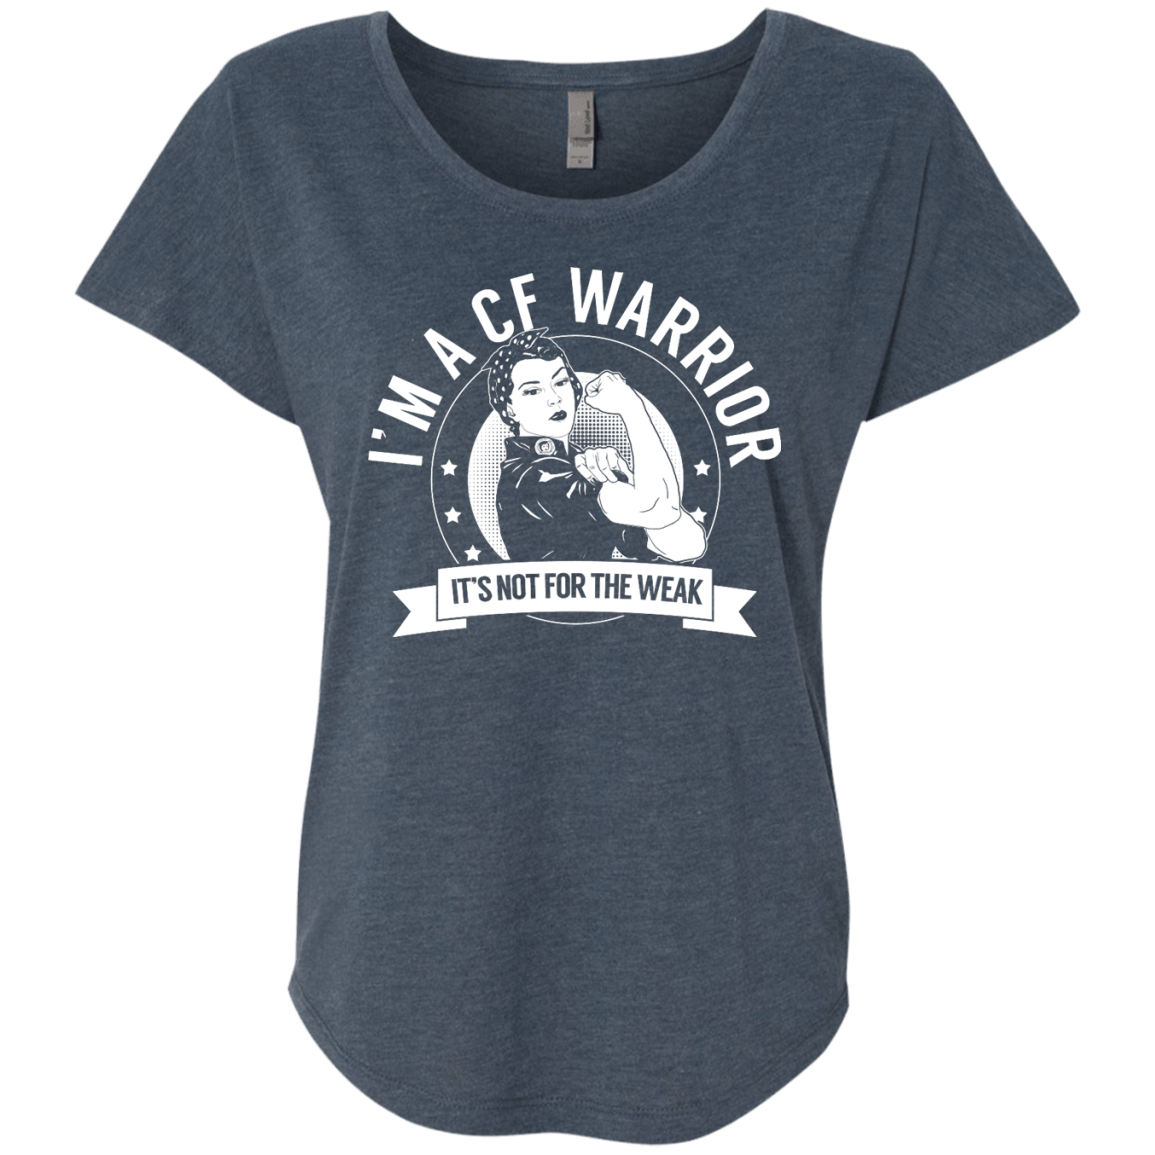 Cystic Fibrosis - CF Warrior Not For The Weak Dolman Sleeve - The Unchargeables